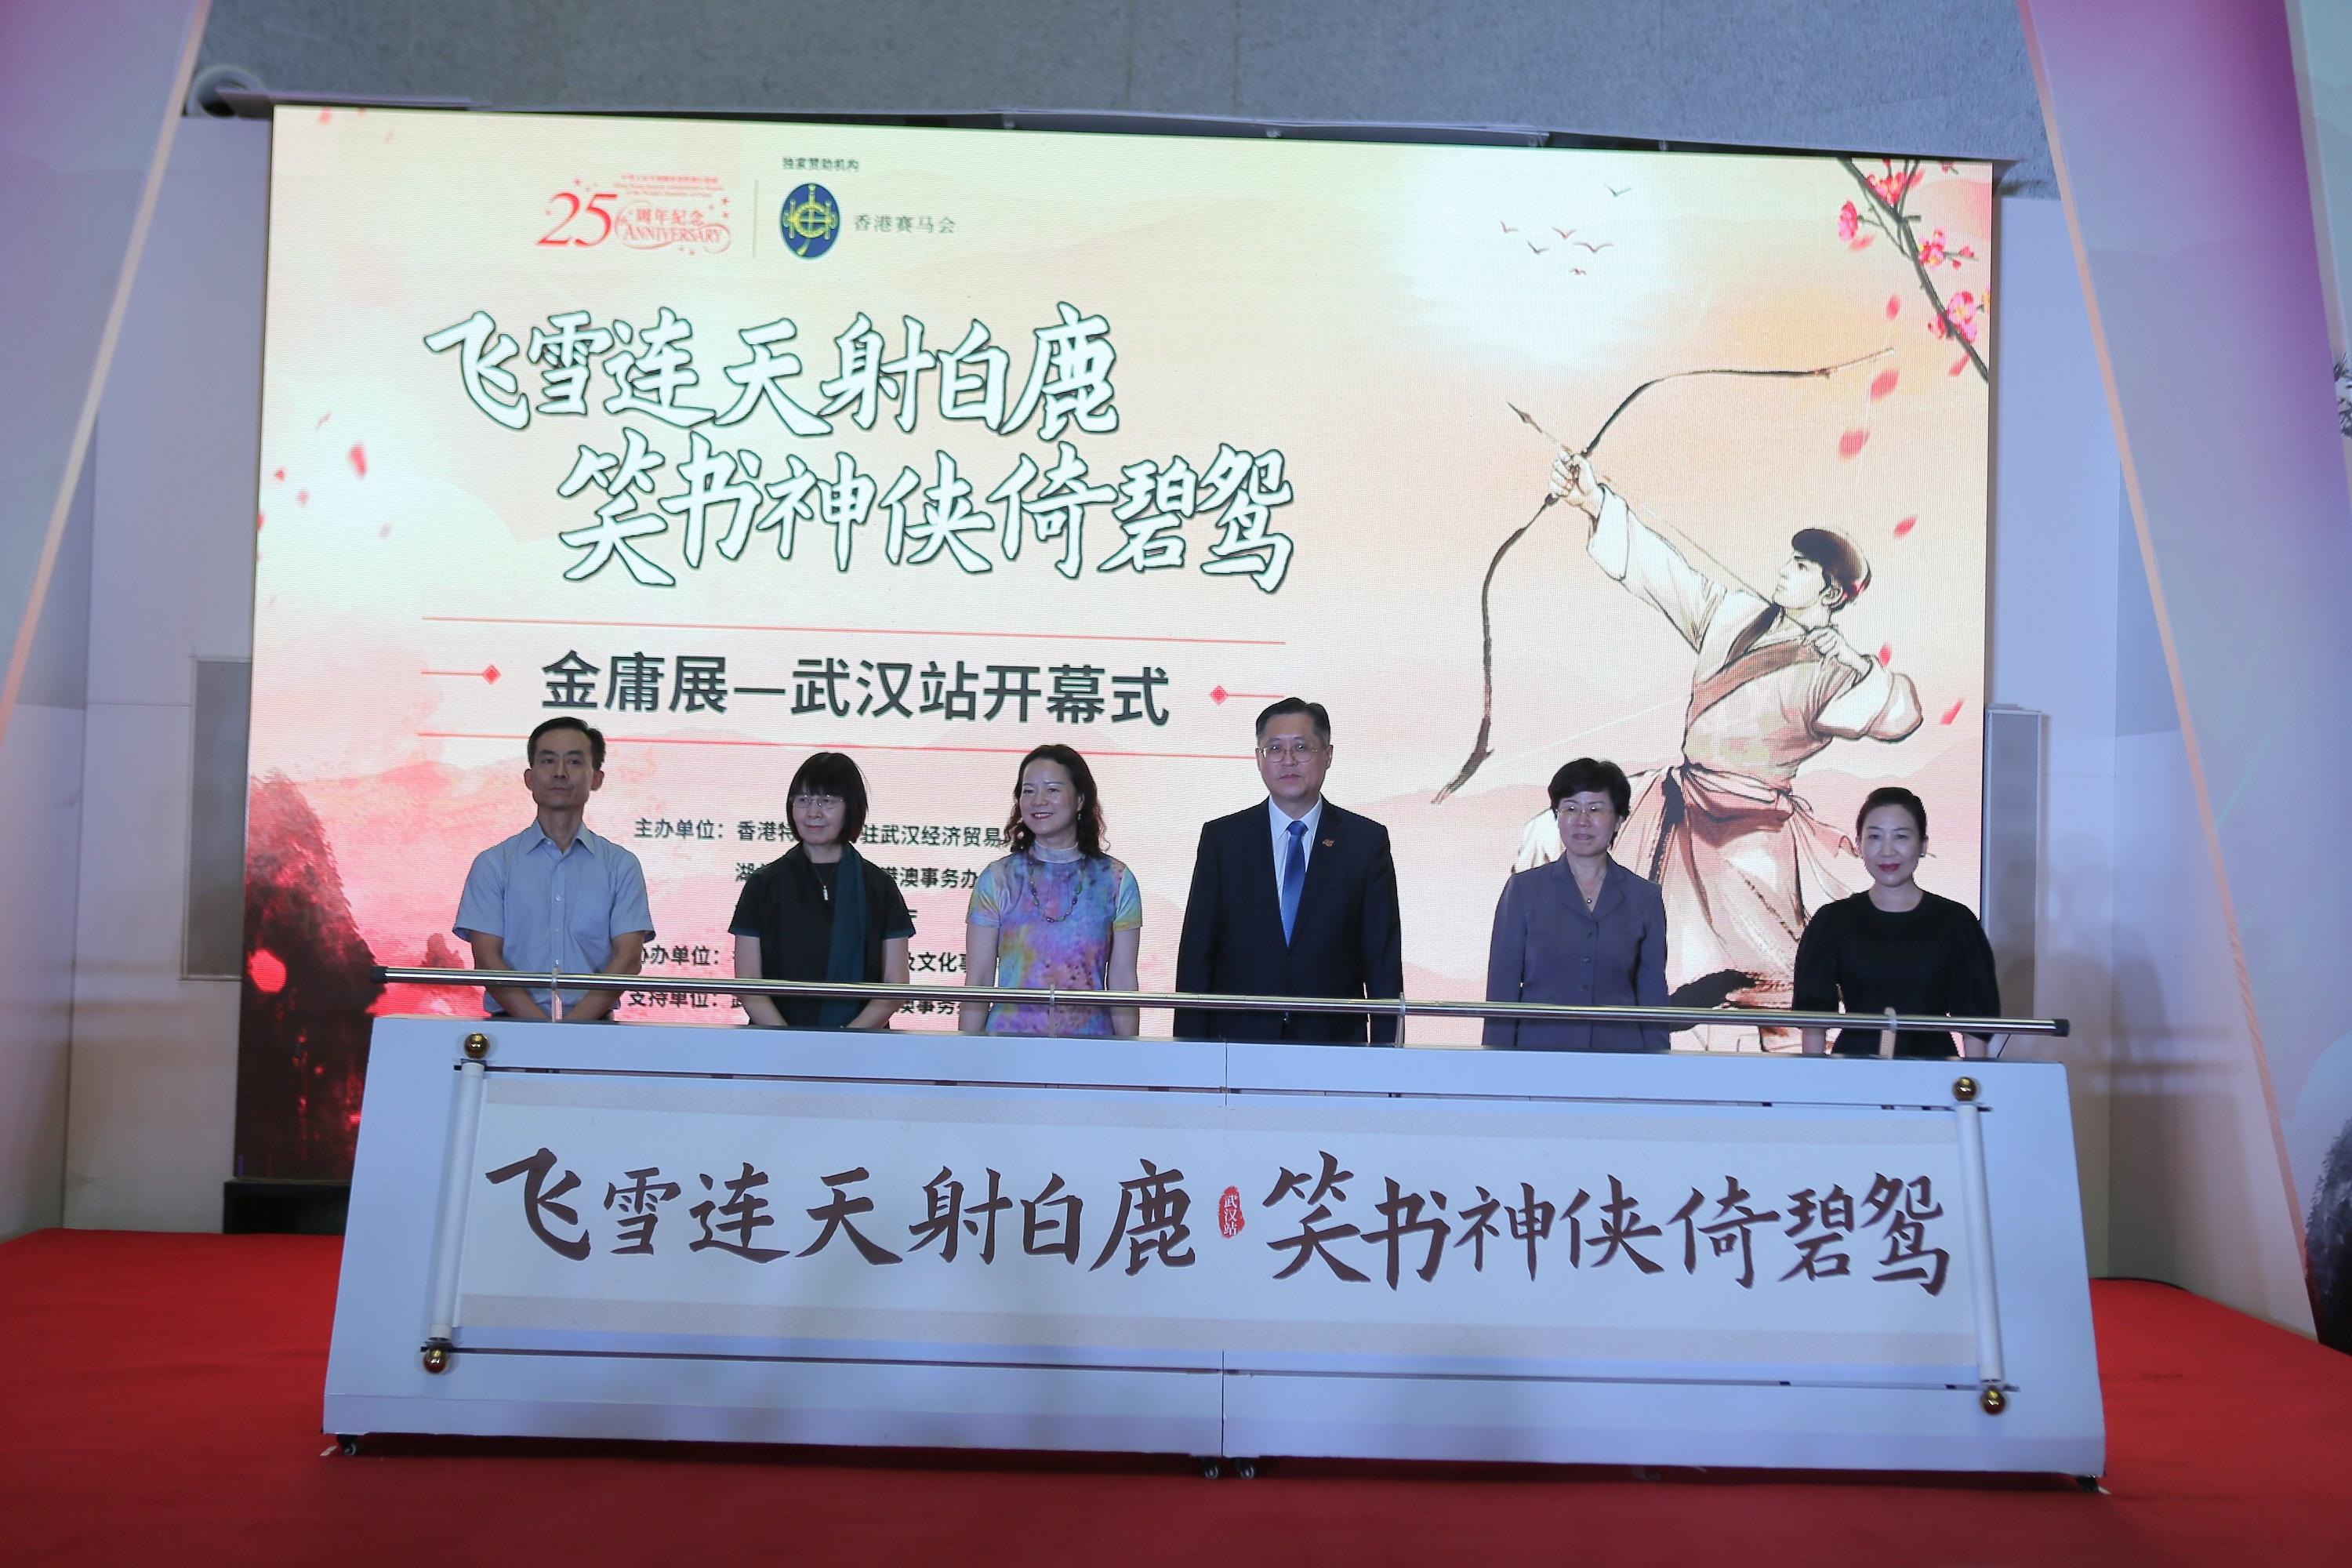 A themed exhibition on the veteran journalist and renowned writer, Dr Louis Cha (pen name Jin Yong), was officially opened today (September 9) at the Hubei Provincial Library in Wuhan. Photo shows the officiating guests of the exhibition, including the Director of the Hong Kong Economic and Trade Office in Wuhan, Mr Franco Kwok (third right); the Director General of the Hong Kong and Macao Affairs Office of Hubei Province, Ms Zhang Xiao-mei (third left); the Director General of the Department of Culture and Tourism of Hubei Province, Ms Li Shu-yong (second right); the Deputy Director of the Hong Kong and Macao Affairs Office of Wuhan, Ms Lei Qing-ping (second left); the Deputy Director of the Wuhan Municipal Administration of Culture and Tourism, Ms Yang Jing (first right); and the Director of the Hubei Provincial Library, Mr Liu Wei-cheng (first left).